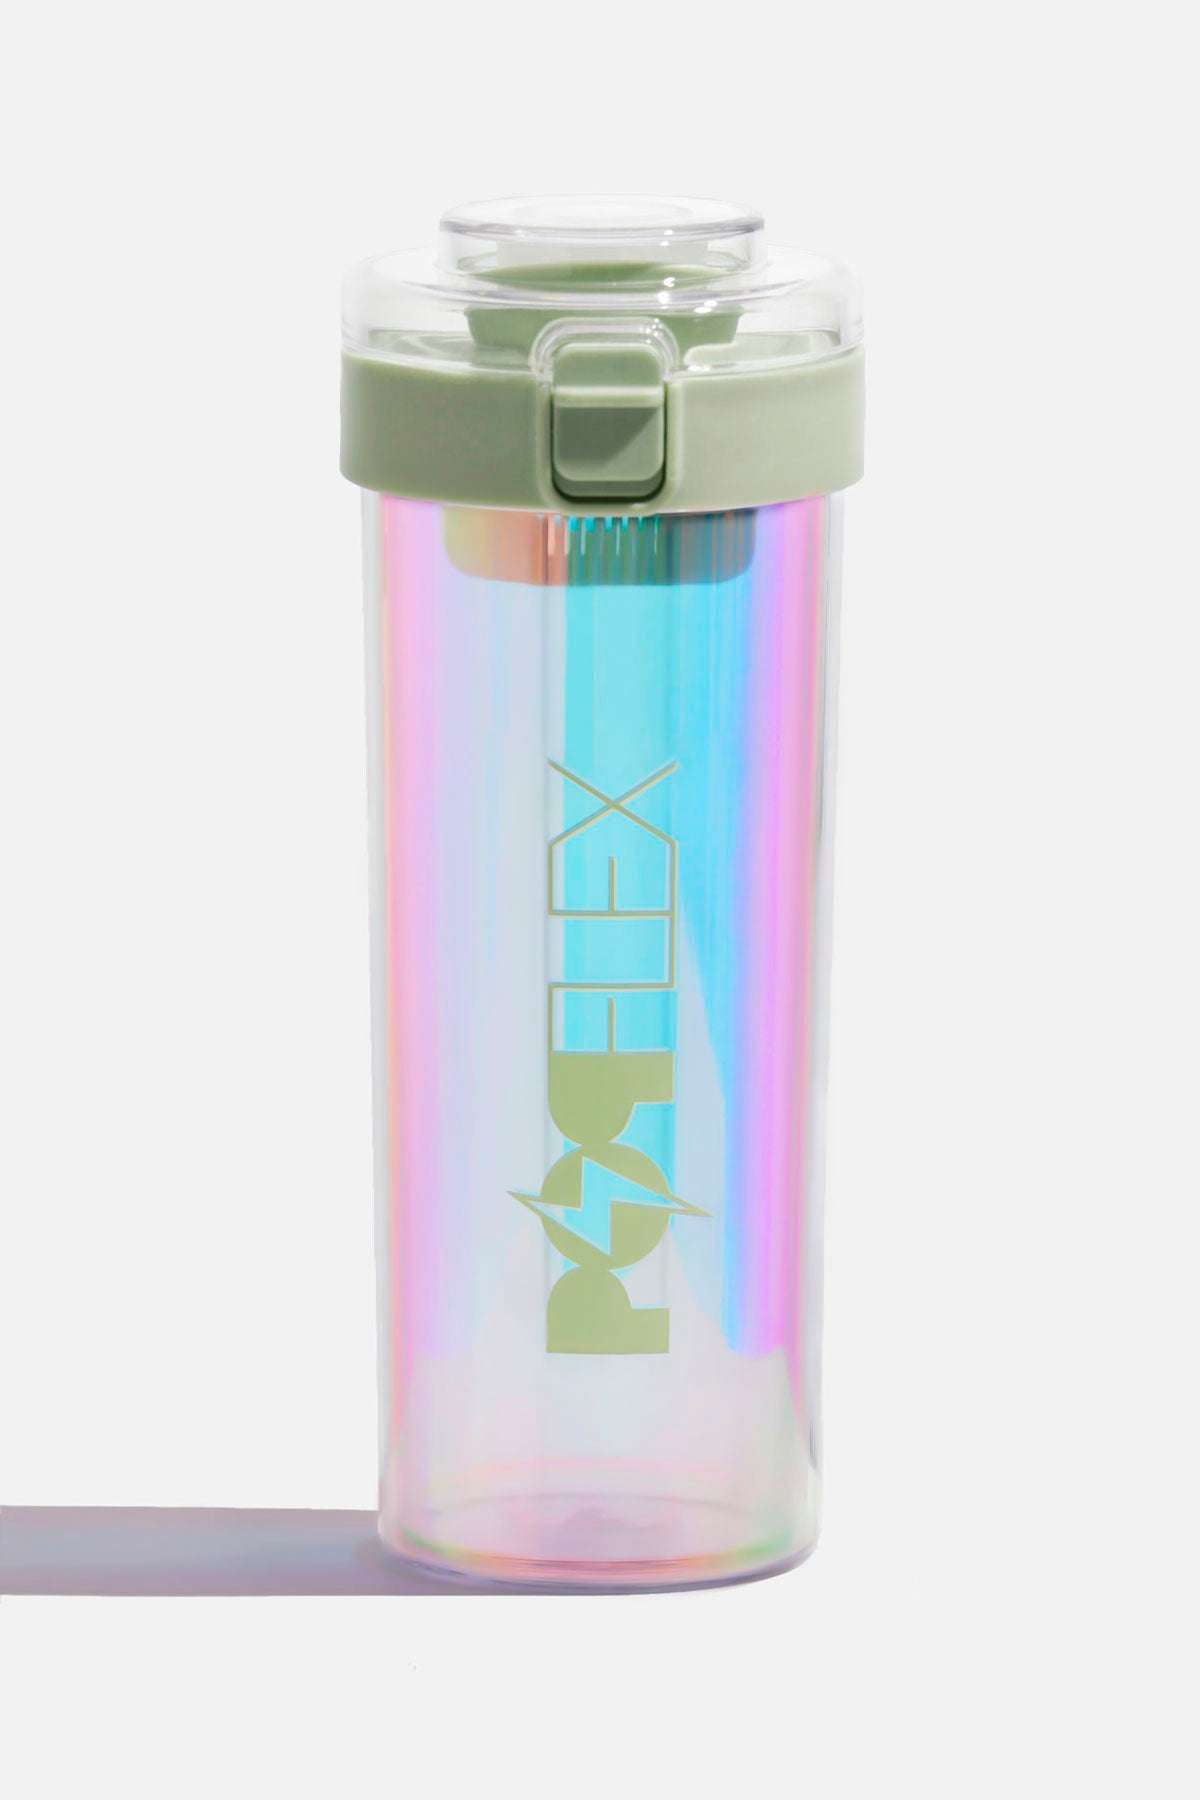 POPFLEX by Blogilates Starry Night Water Bottle - 64 oz. Insulated Water Bottle for Ice Cold Liquids - Cute Sweat Proof Stainless Steel Water Bottle